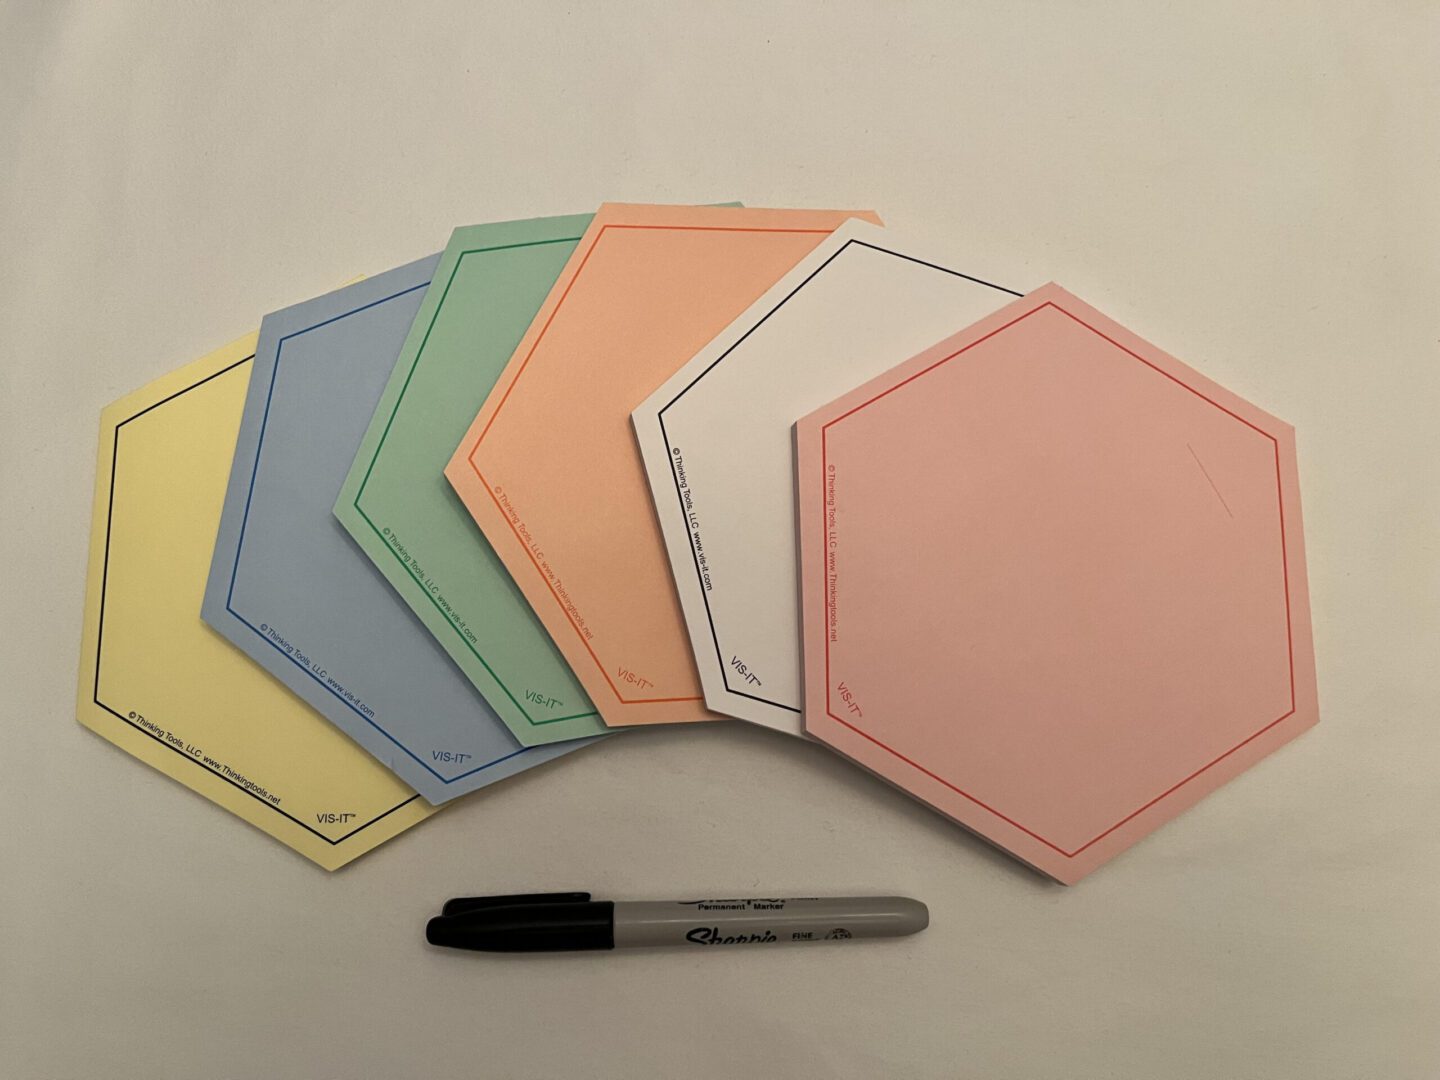 A SIX-COLOR Set of VIS-IT™ Hexagon Pads 6x6 in. (300 sheets total) with a marker.